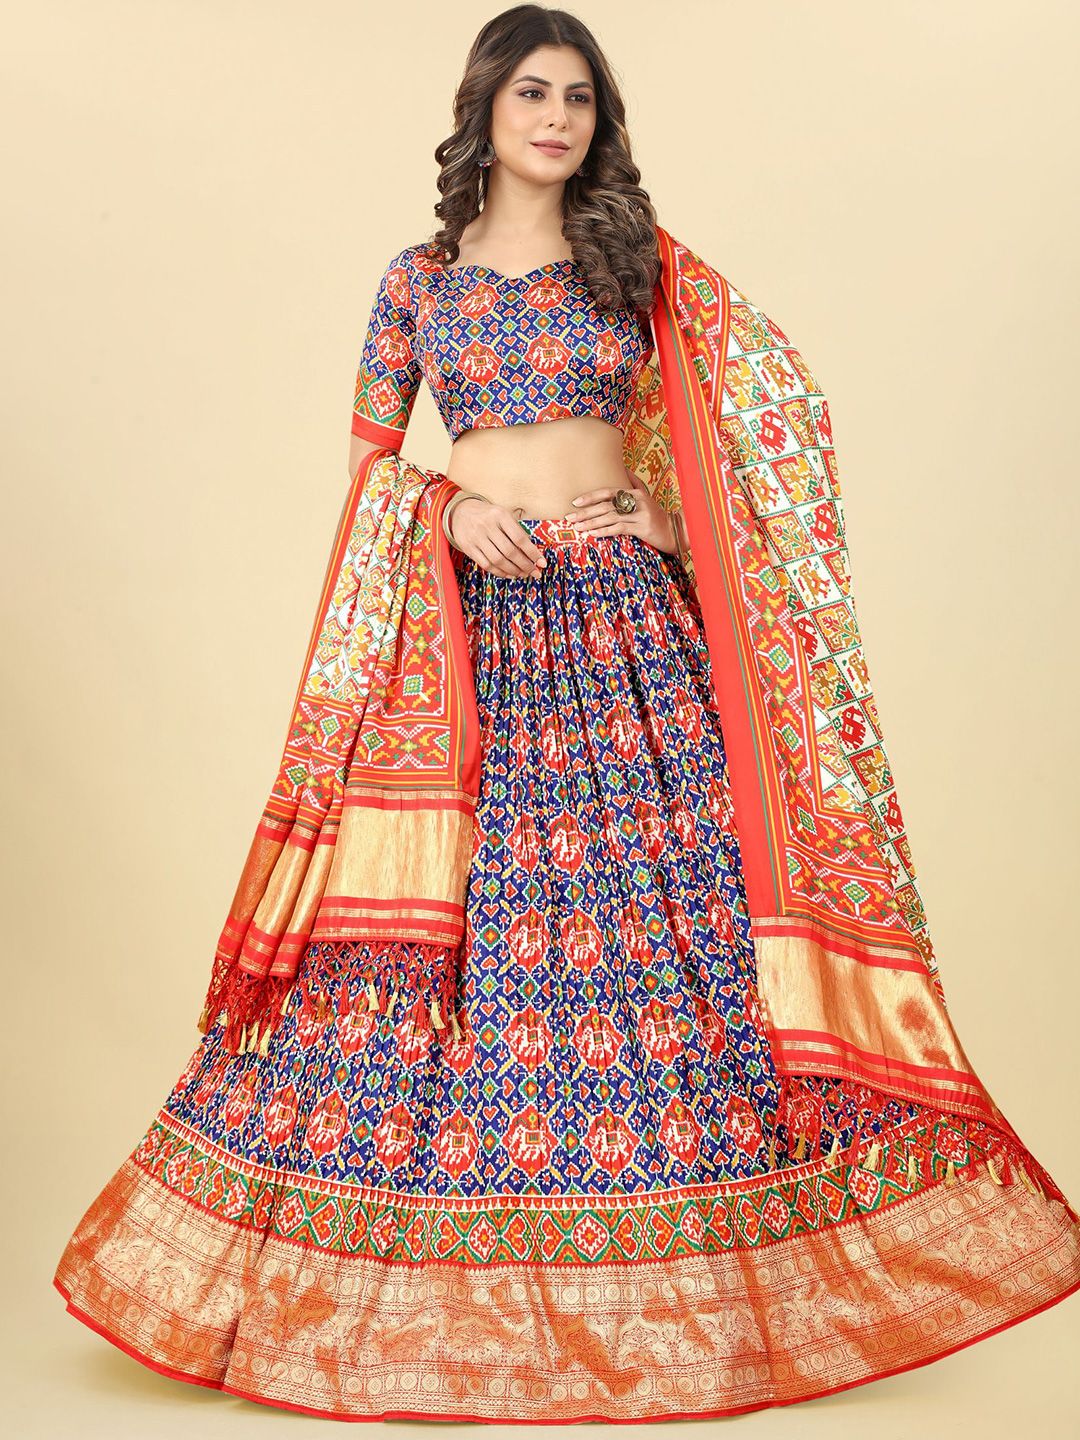 KALINI Printed Semi-Stitched Lehenga & Unstitched Blouse With Dupatta Price in India